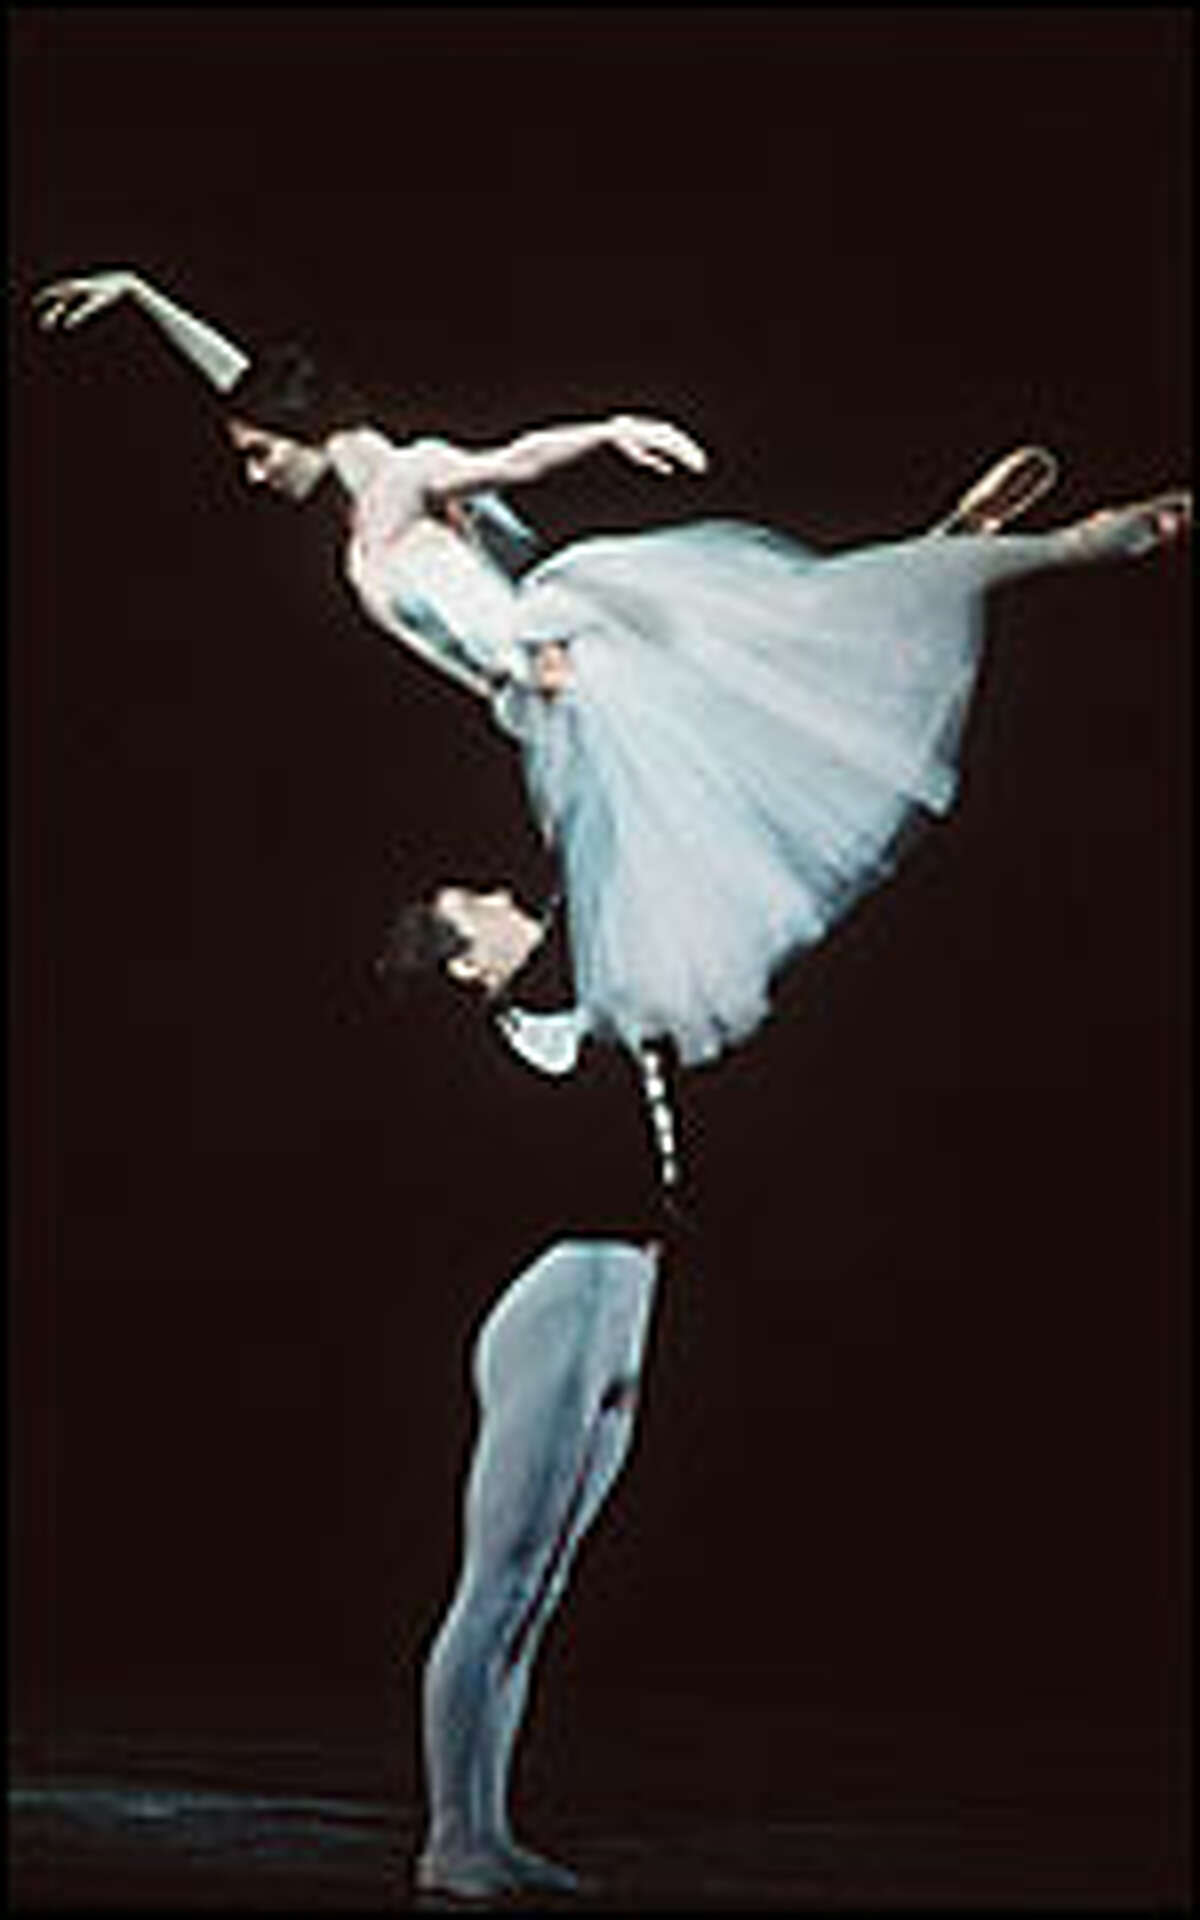 Giselle's spirit returns from the grave to forgive Albrecht, the man who betrayed her, in the second act of the ballet "Giselle." Ashley Tuttle dances the title role in the photograph above, and Angel Corella plays Albrecht.